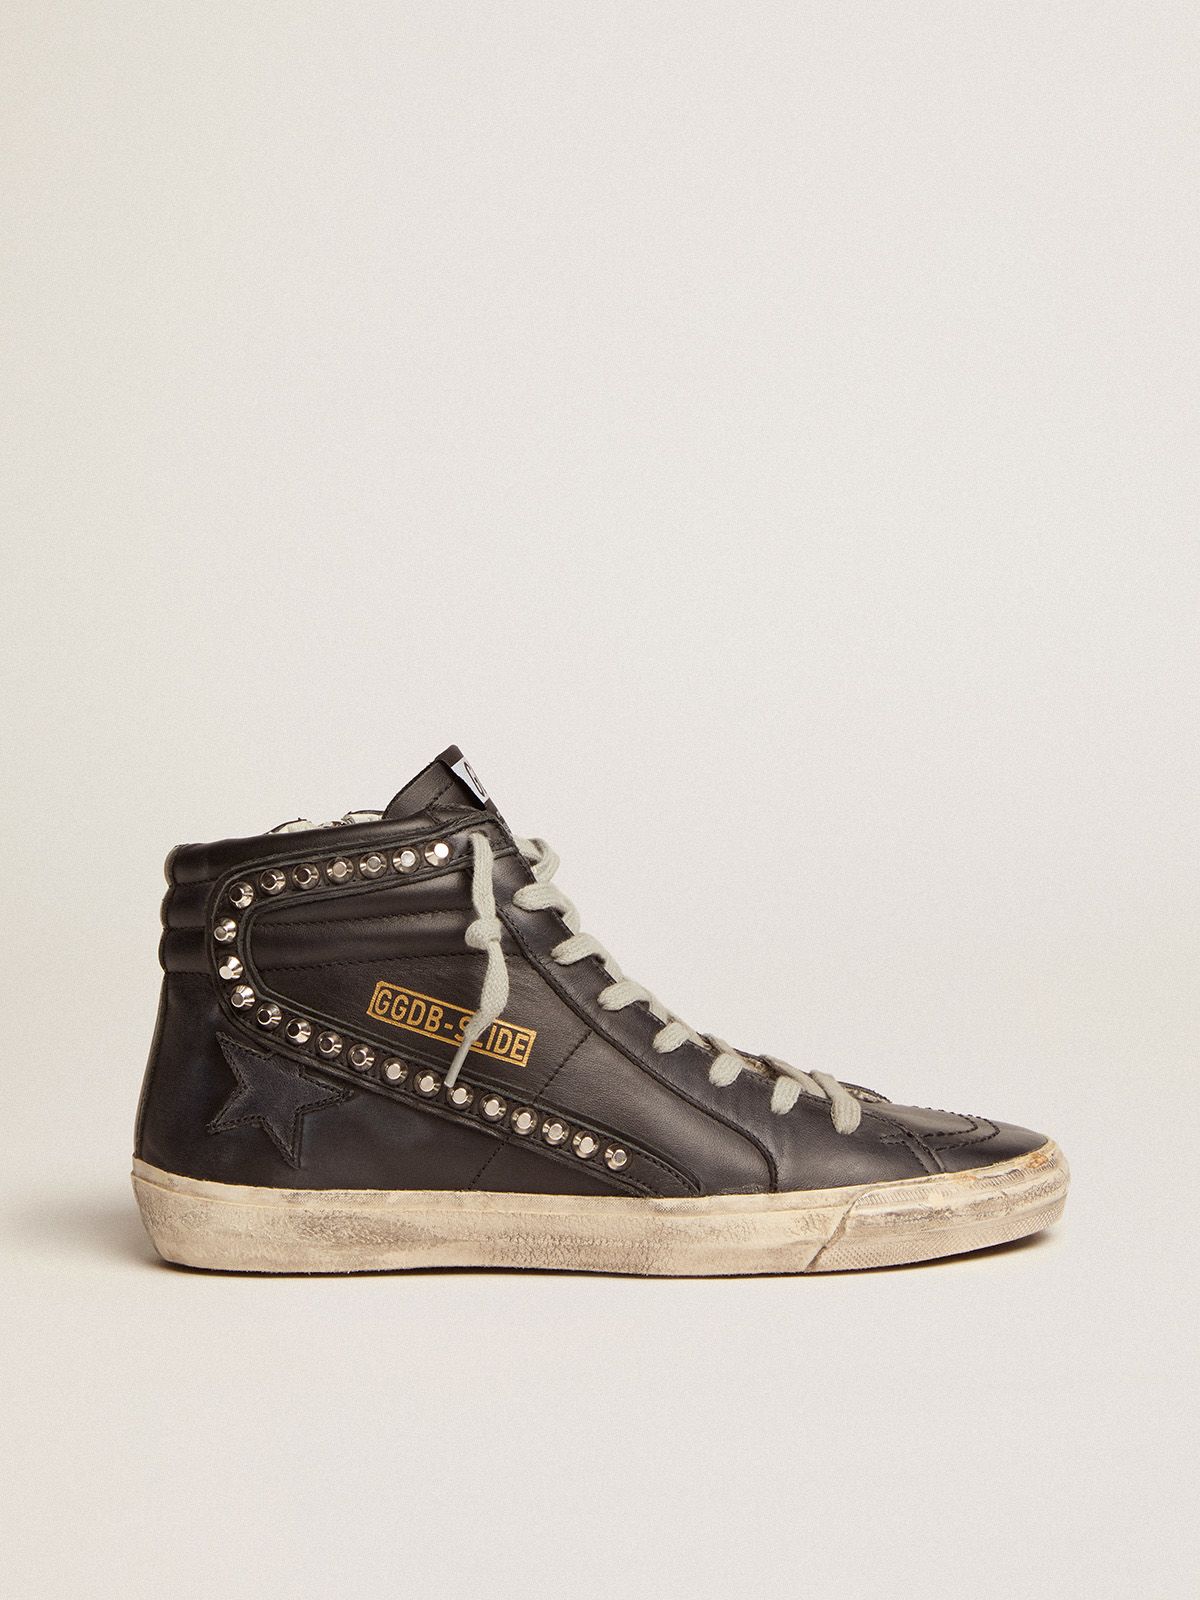 Slide sneakers in metal studded leather | 